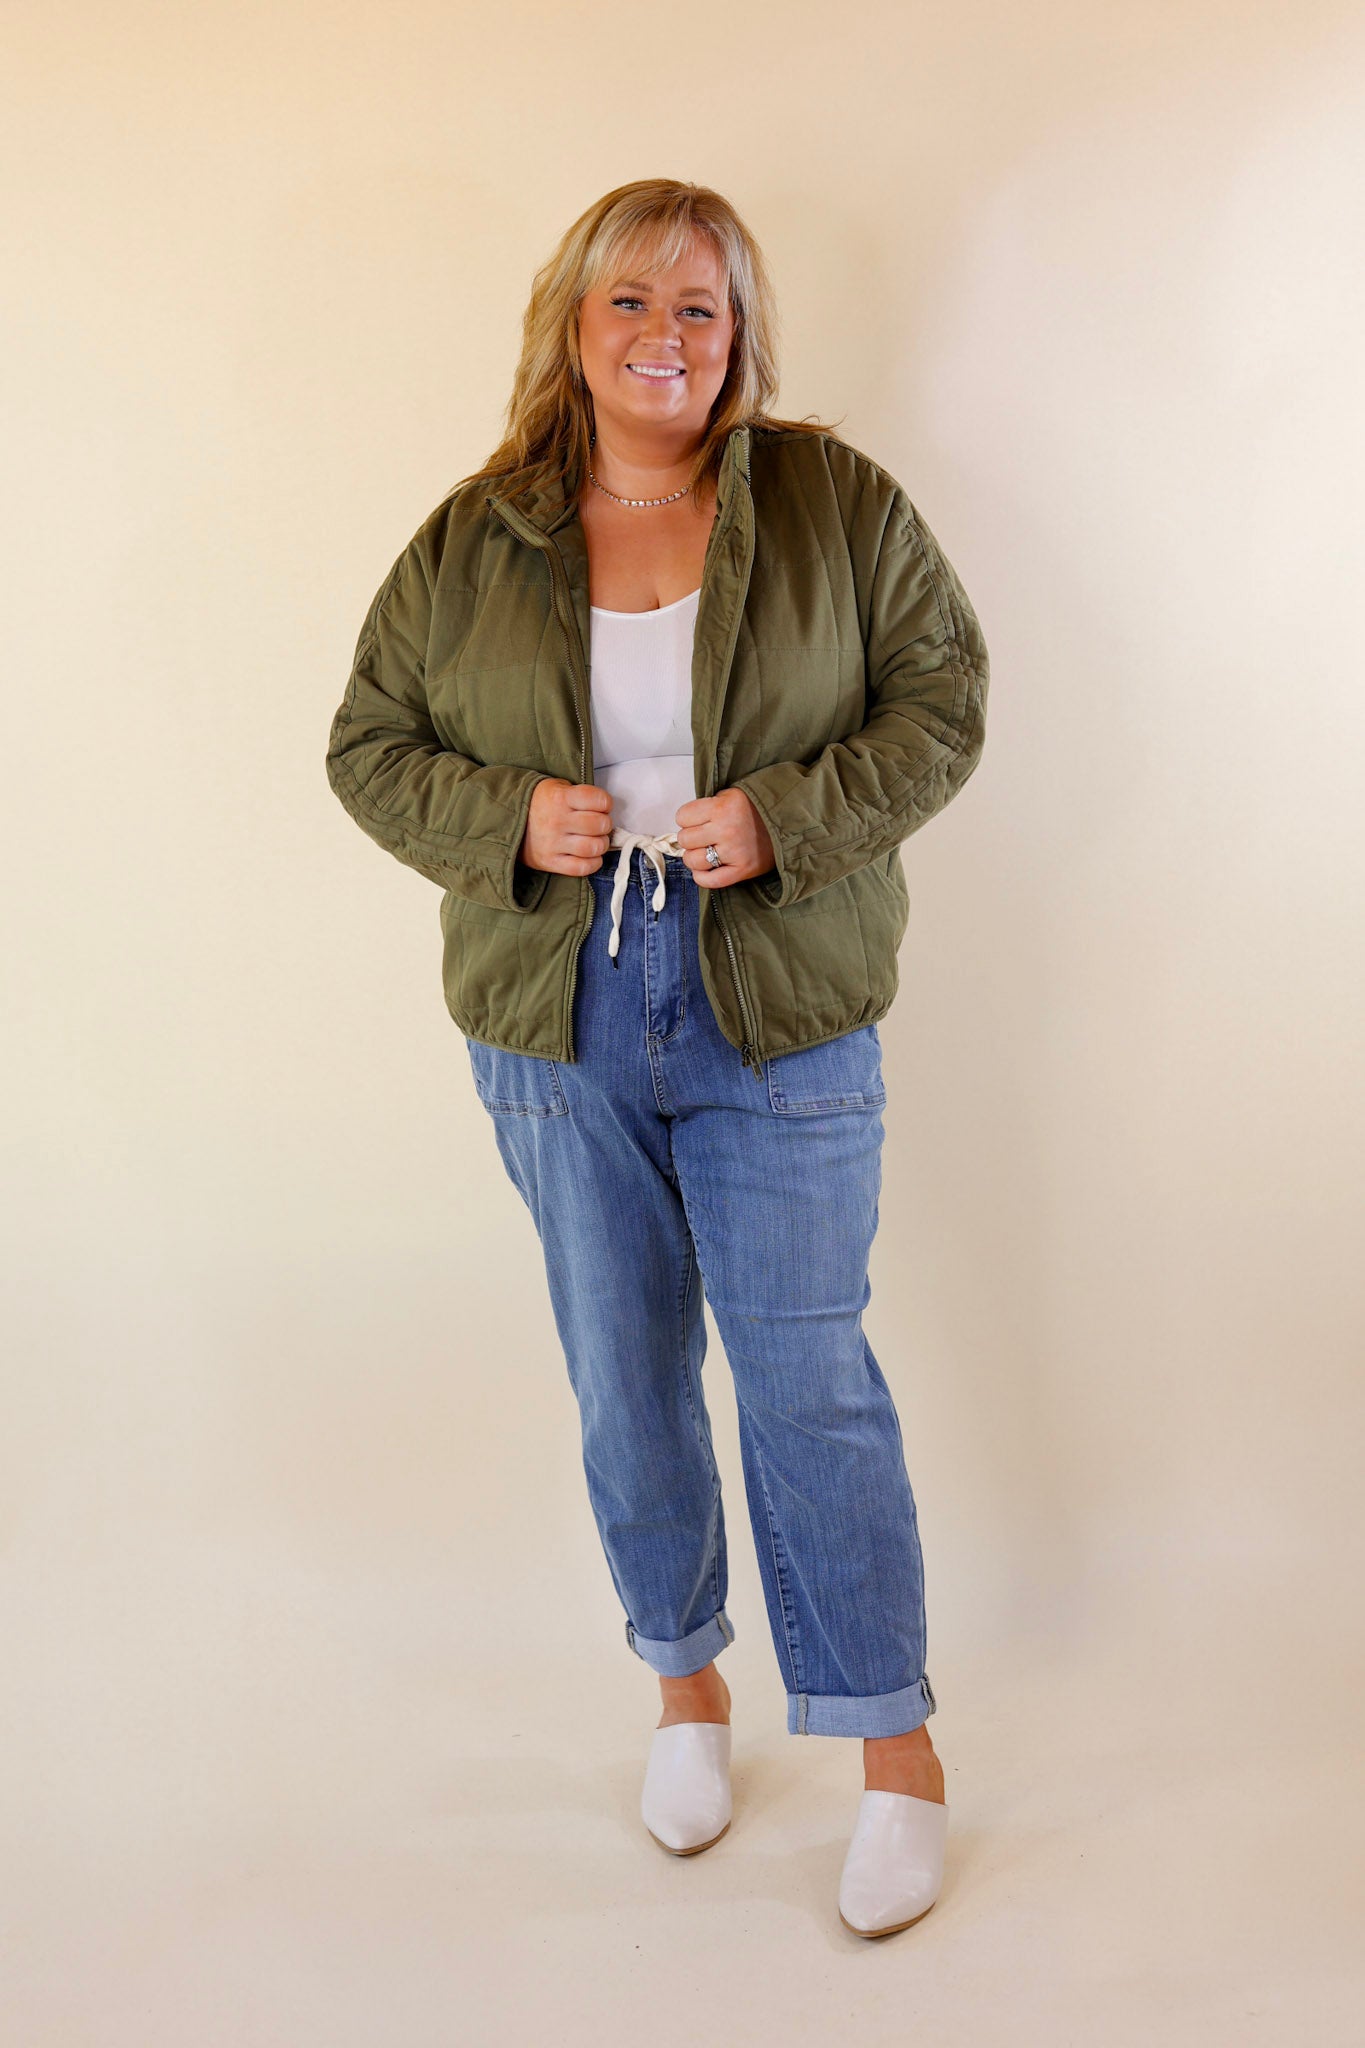 Park Slope Quilted Zip Up Jacket in Olive Green - Giddy Up Glamour Boutique